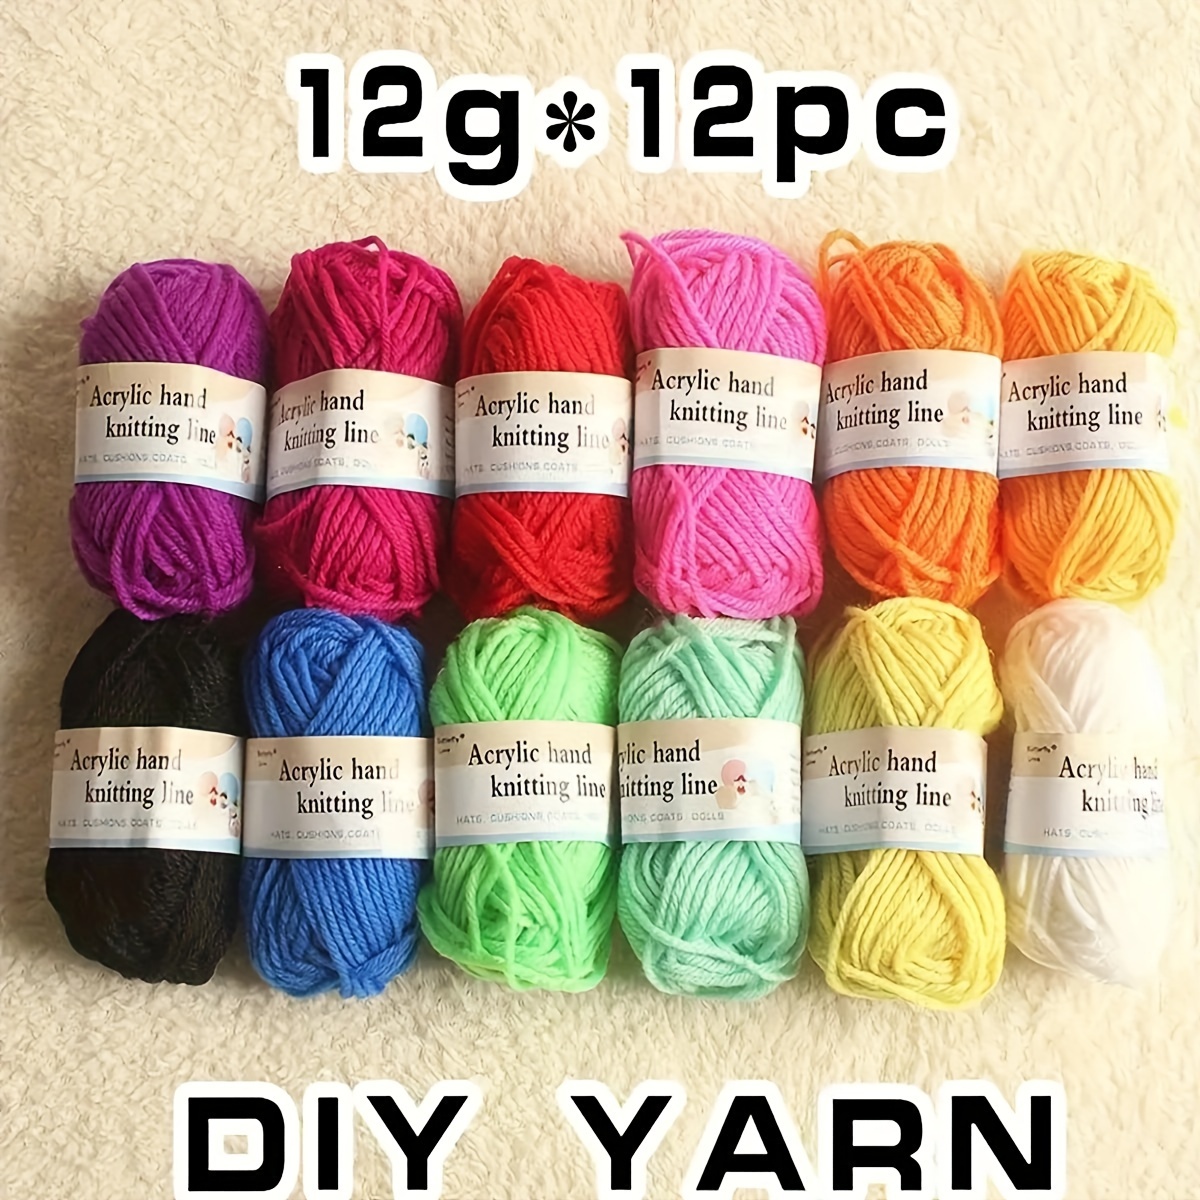 

Soft Acrylic Yarn 12-pack, 12g Each - Vibrant Assorted Colors For Crochet, Knitting & Diy Crafts, Perfect For Clothing, Hats, Scarves & Children's Projects, Polyester/acrylic Blend, Colorful Wool Type